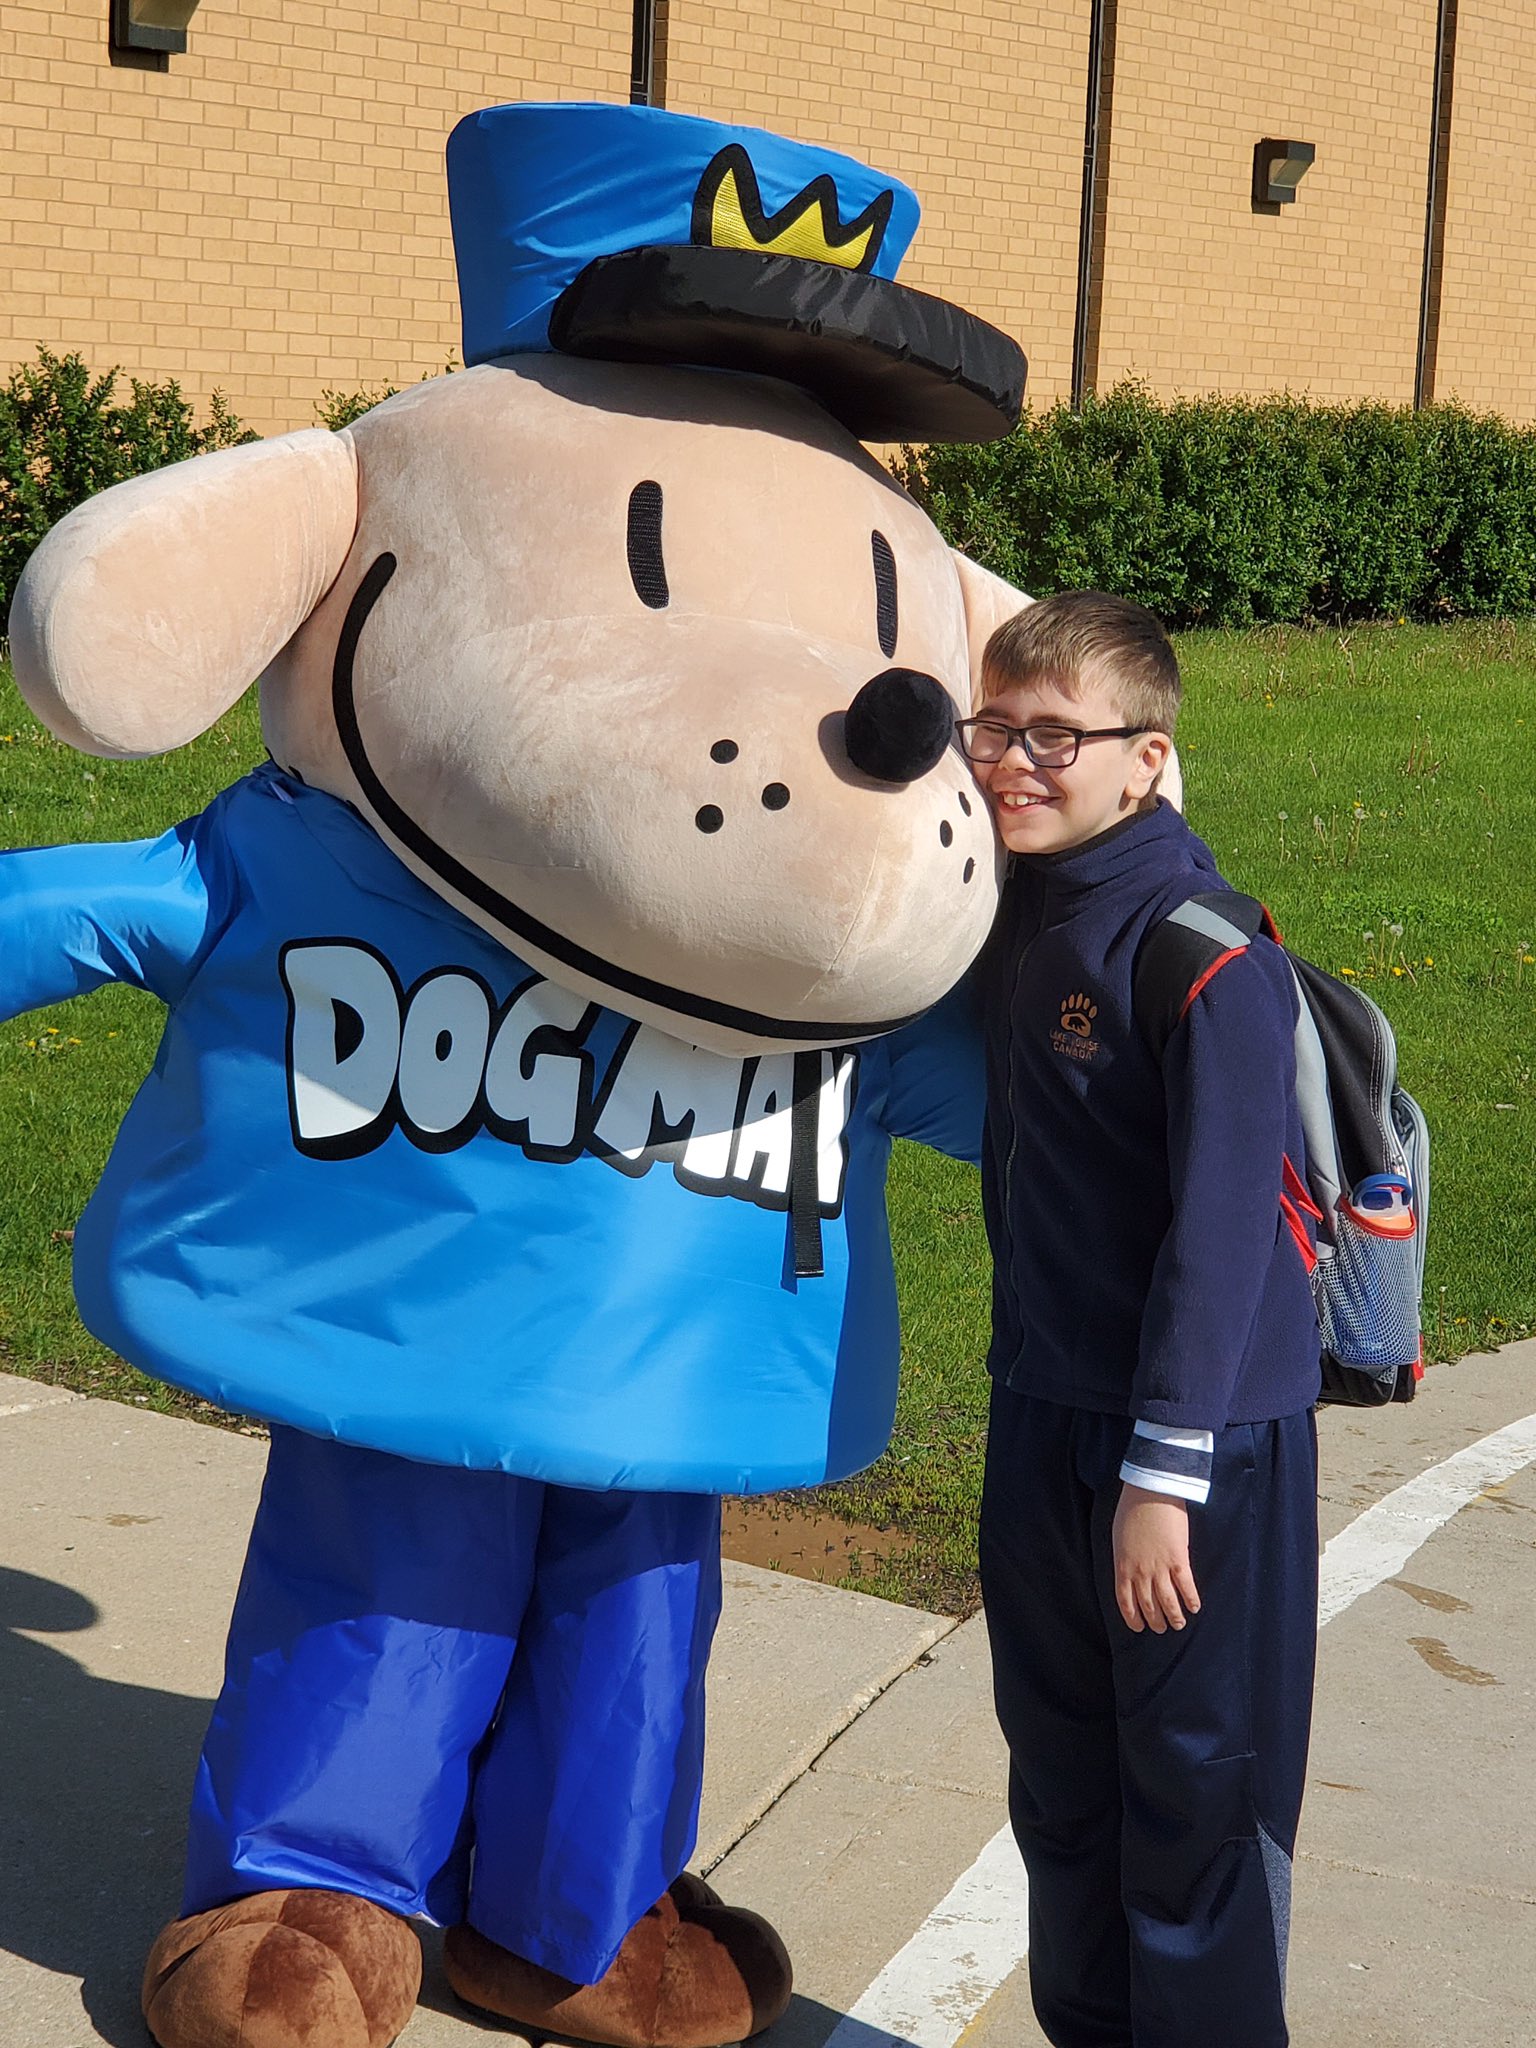 Scholastic on Twitter: "@MrsAColwell You can request the use of the Dog Man  costume through your school's Book Fair consultant. -Karla" / Twitter